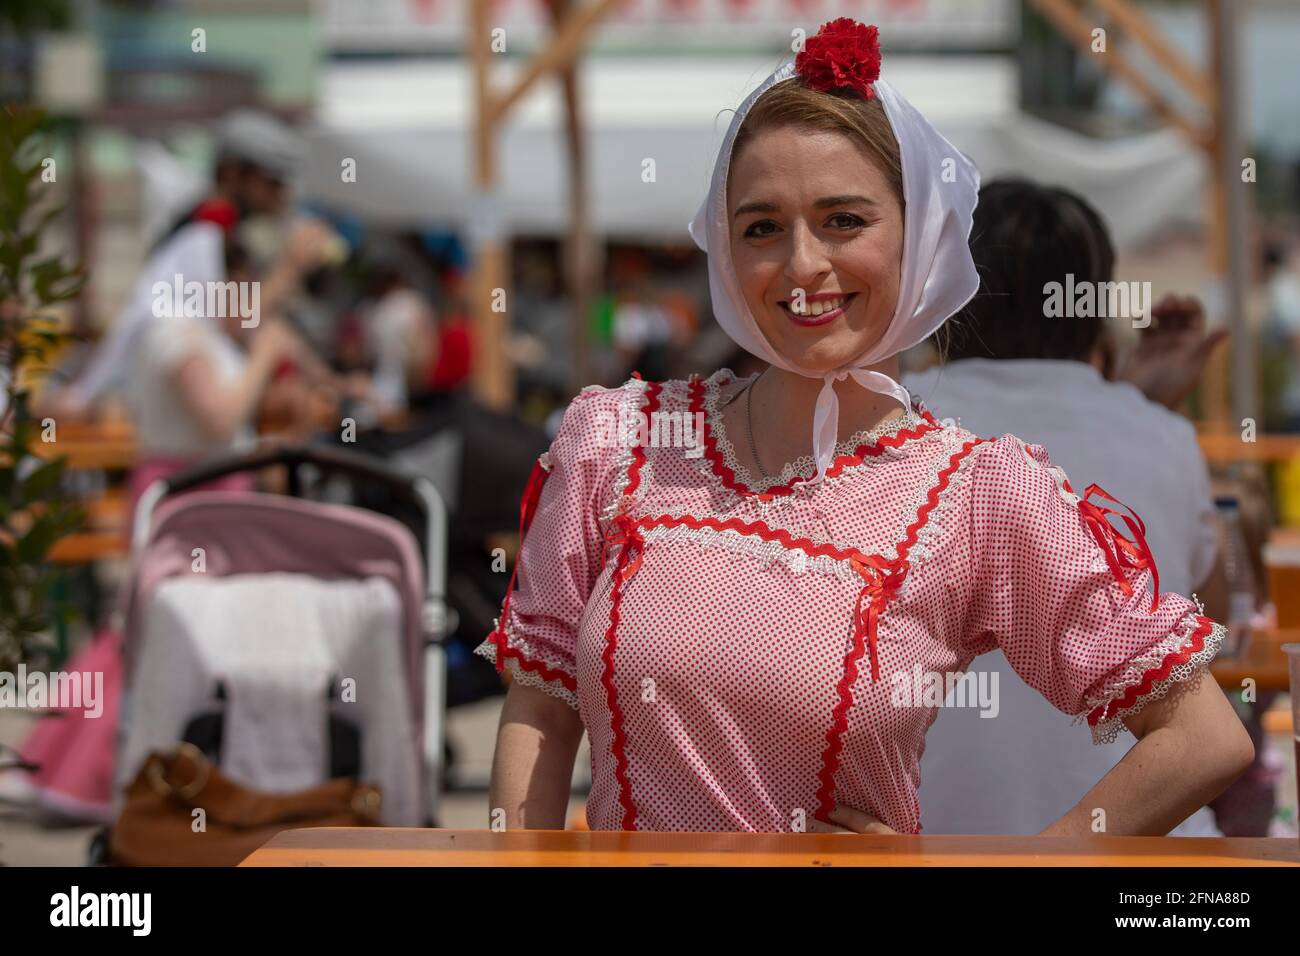 Madrid, Spain. 15th May, 2021. A woman dressed as a chulapa, poses for photos, during the San Isidro festivity in the IFEMA fairground.One of the most celebrated holidays of Madrid is the Feast Day of San Isidro which this year took place in the IFEMA fairground. Credit: SOPA Images Limited/Alamy Live News Stock Photo